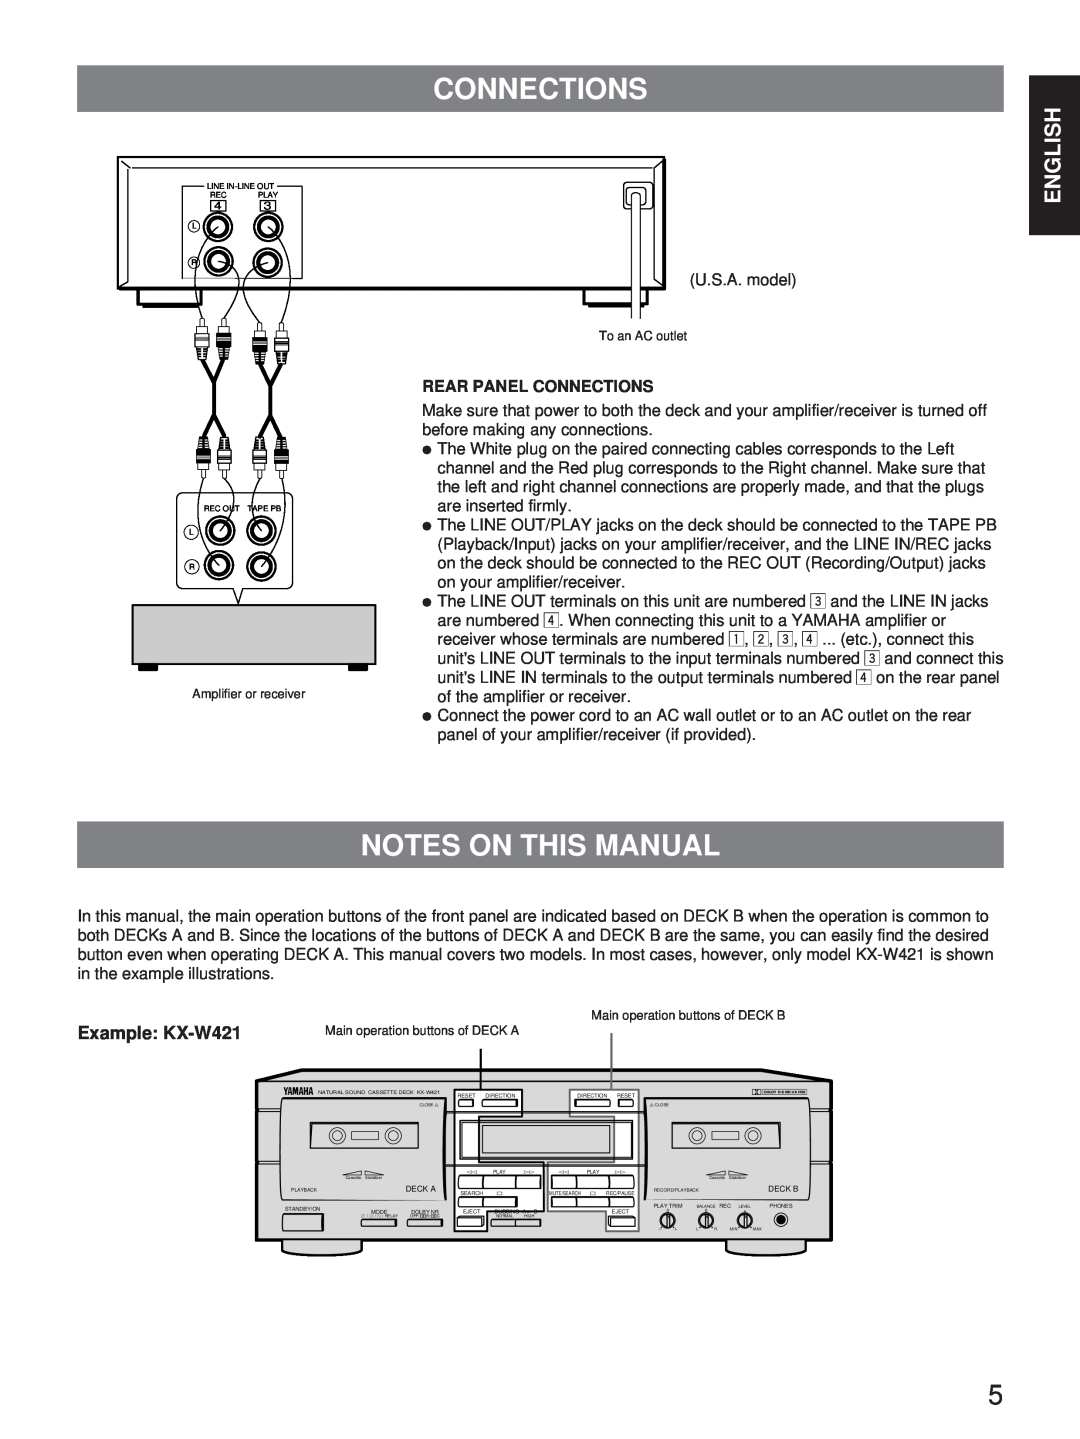 Yamaha KX-W321 owner manual Notes On This Manual, Example KX-W421, Rear Panel Connections, English 